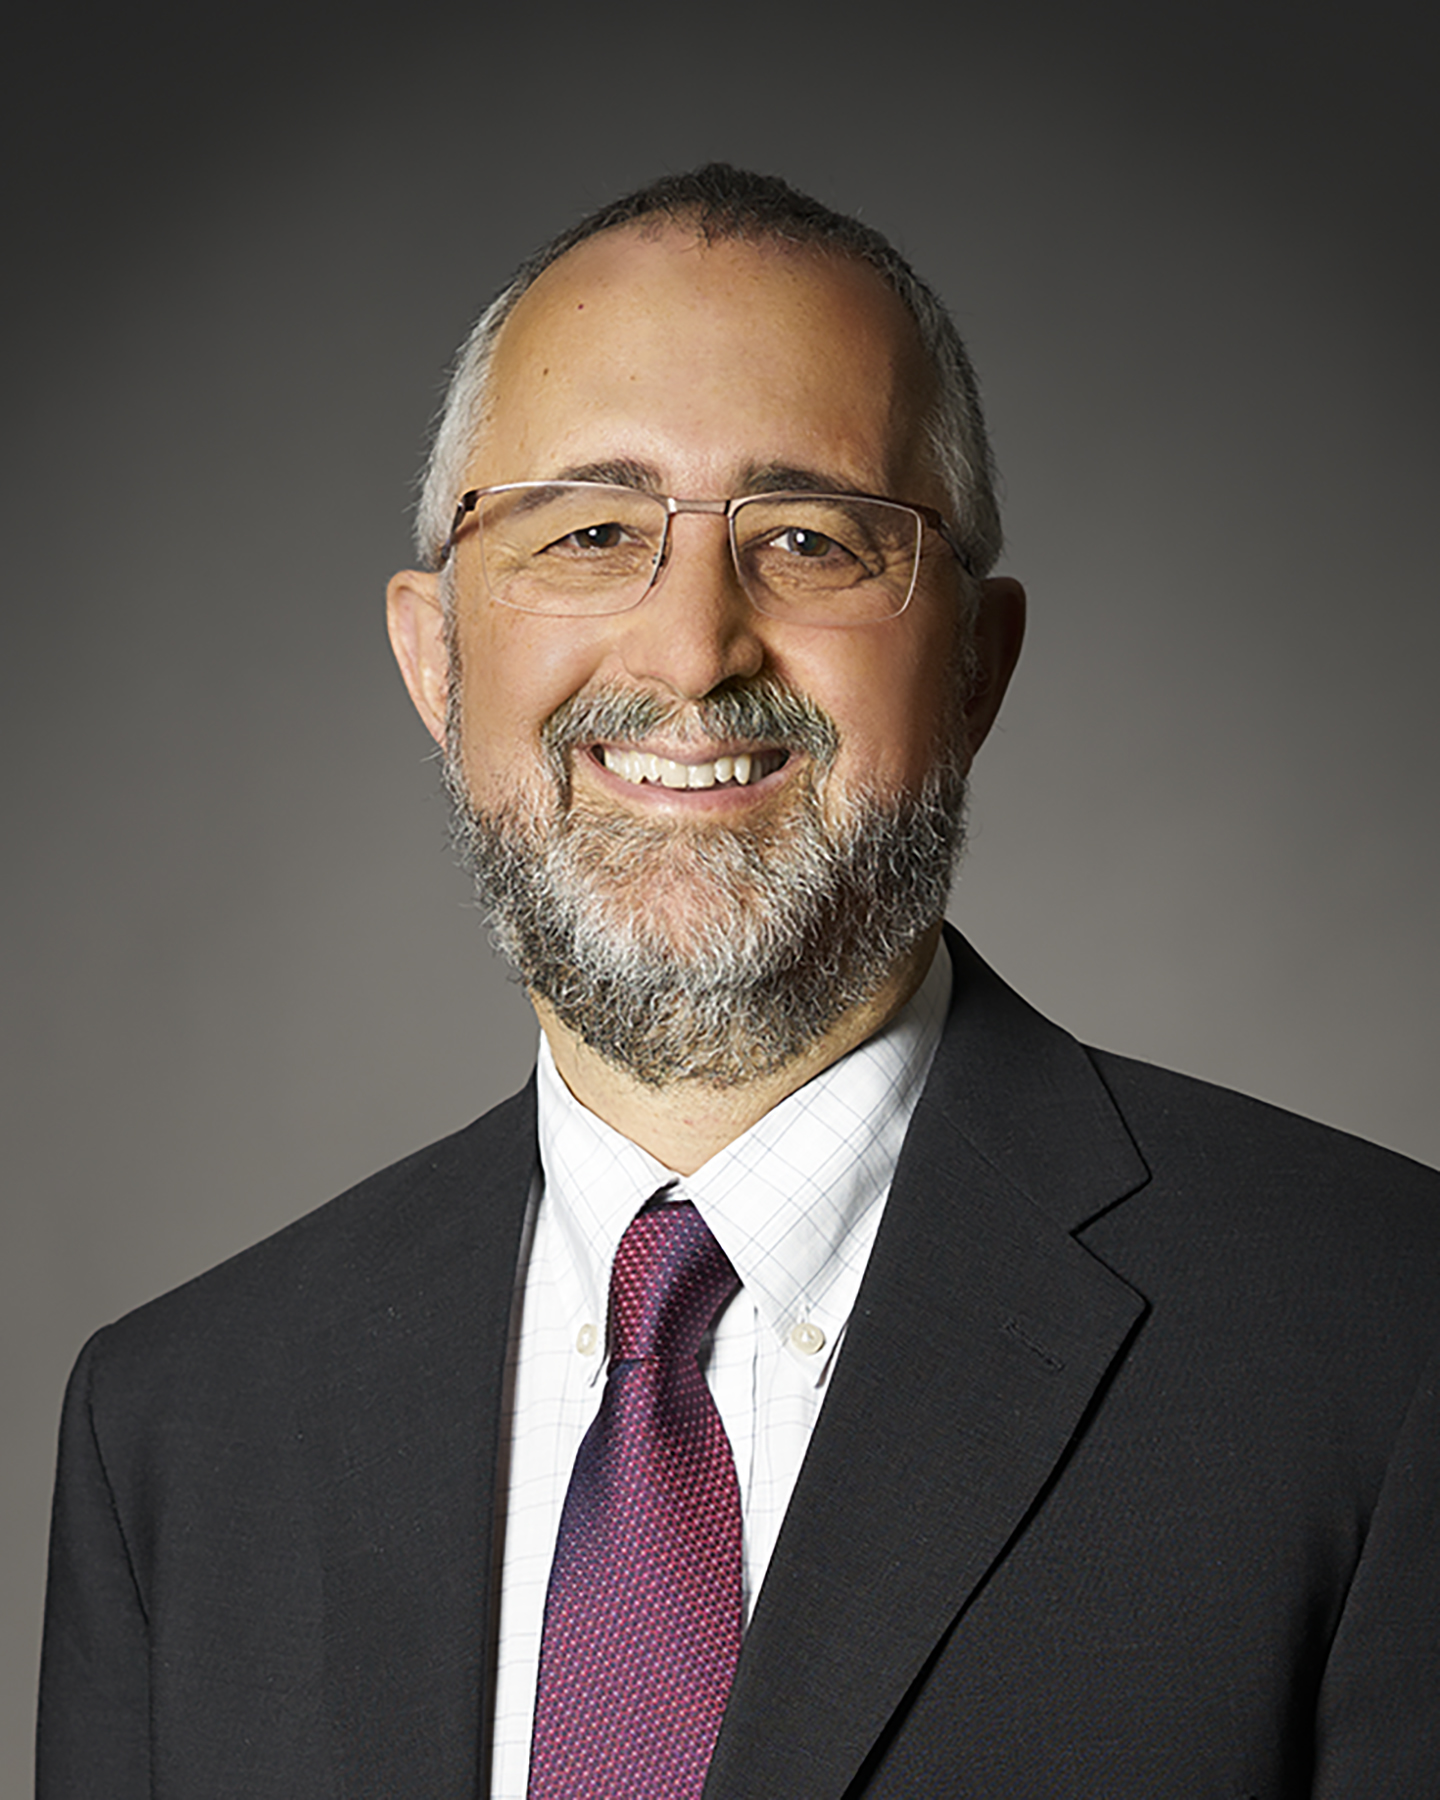 Paul S. Bernstein, MD, PhD, is the vice-chair for clinical and basic science research at the John A. Moran Eye Center at the University of Utah.